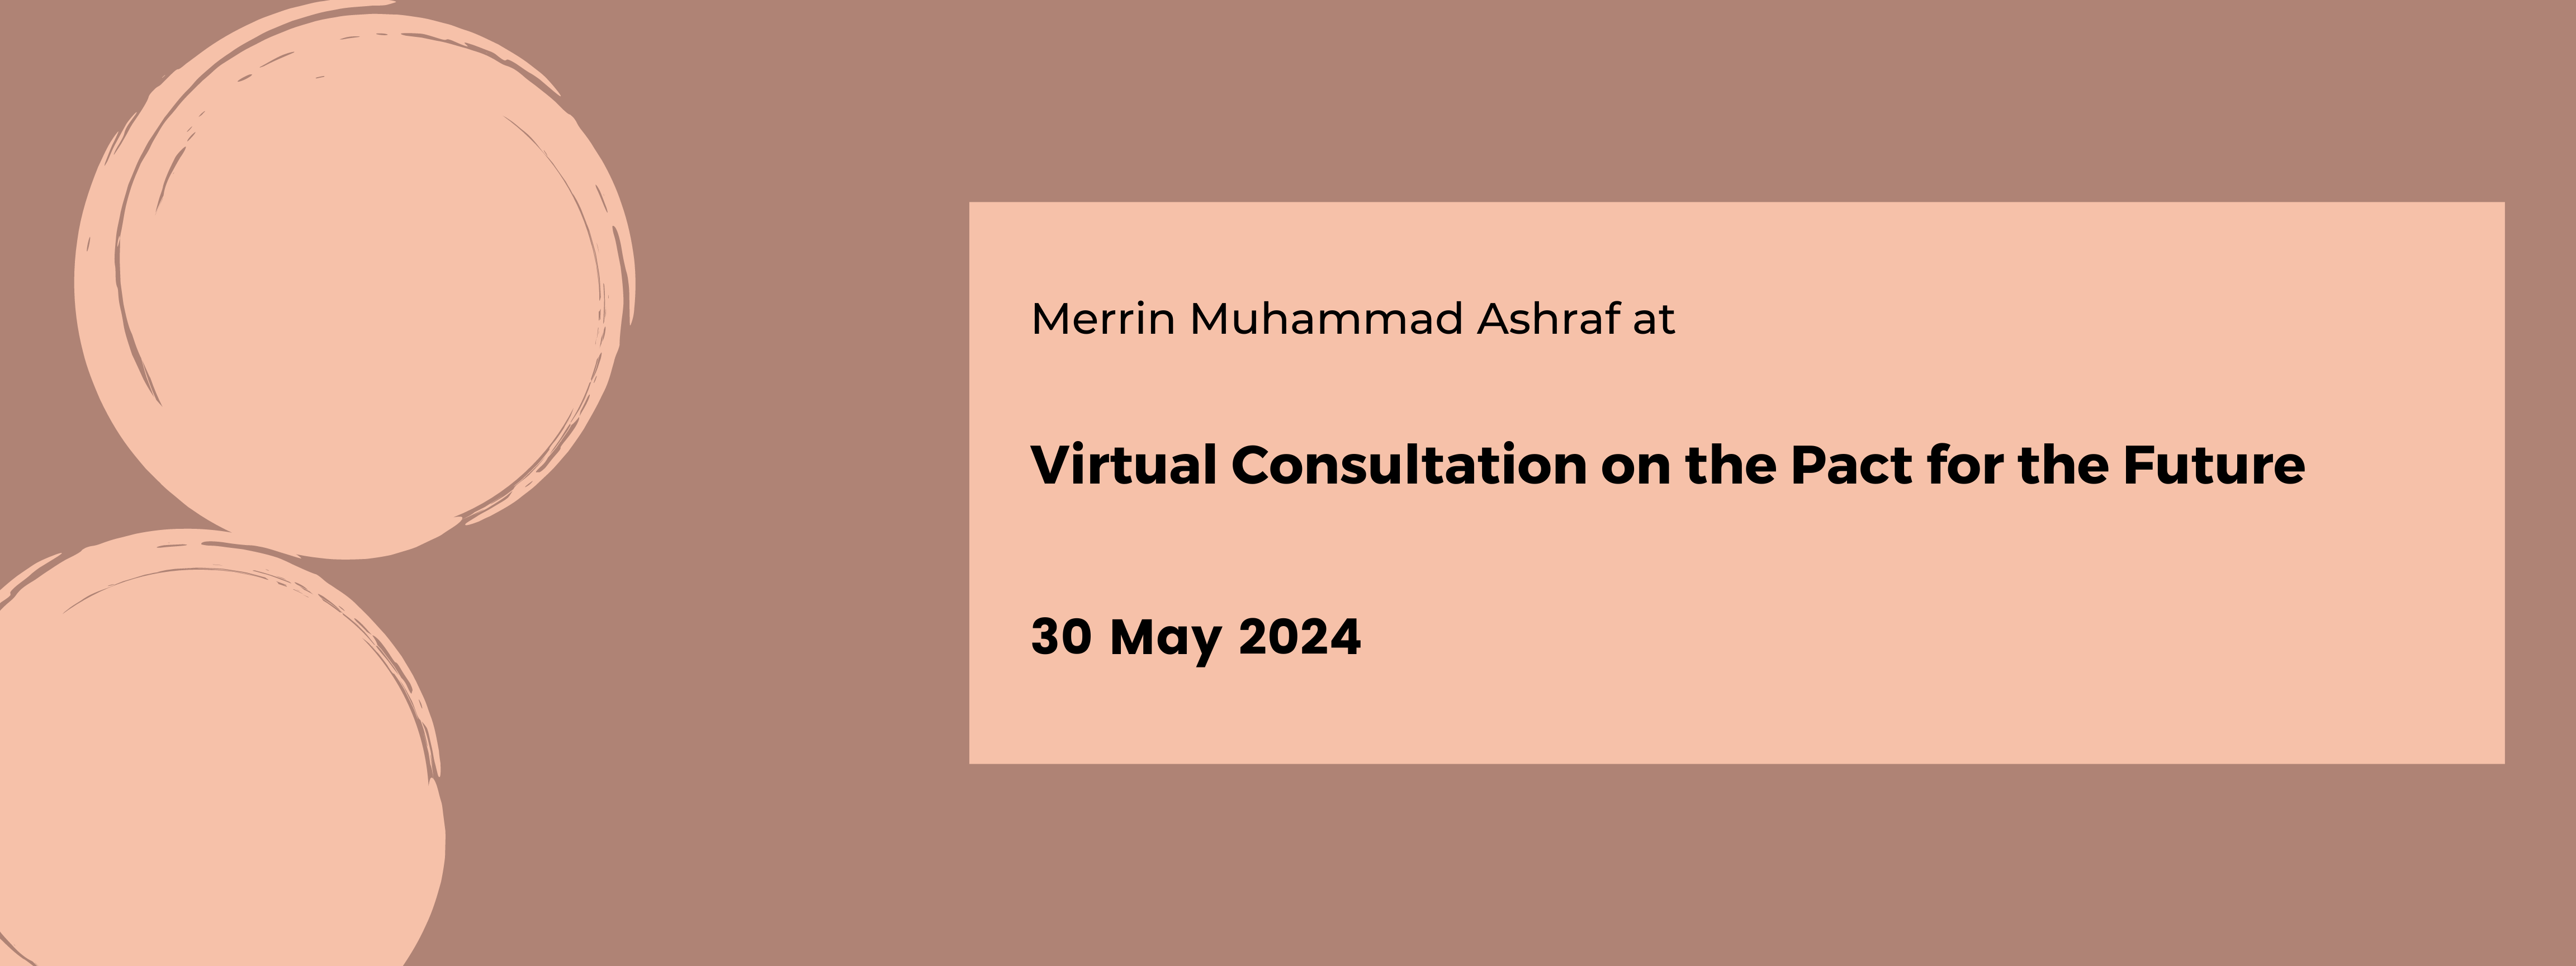 Merrin Muhammad Ashraf at a Virtual Consultation on the Pact for the Future 30 May 2024